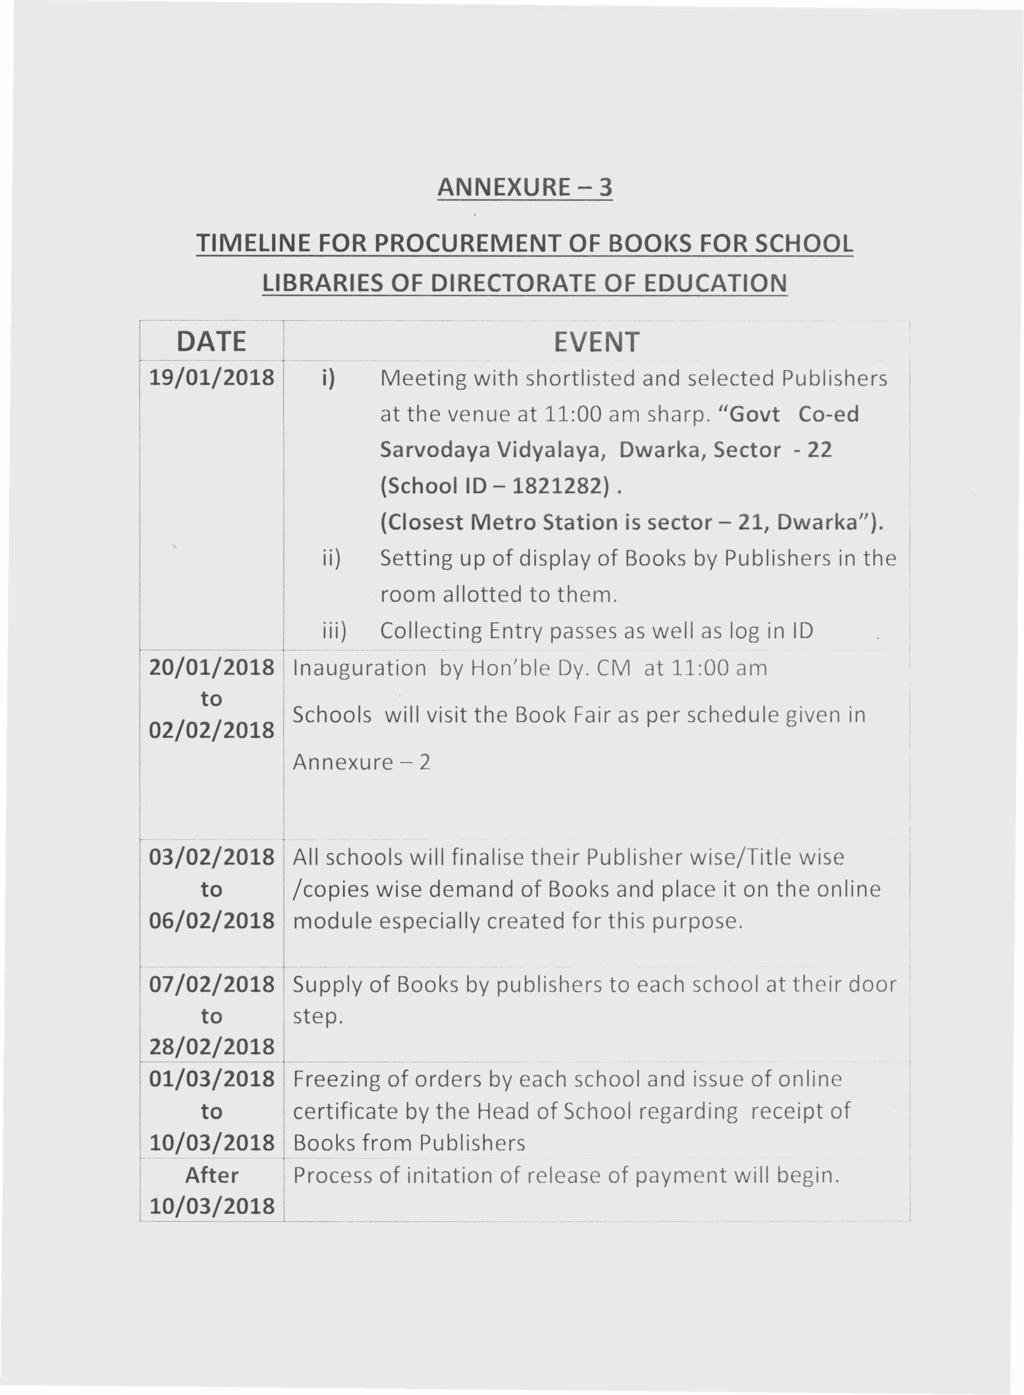 ANNEXURE - 3 TIMELINE FOR PROCUREMENT OF BOOKS FOR SCHOOL LIBRARIES OF DIRECTORATE OF EDUCATION r------- -------,--- - ---- DATE ------ 19/01/2018 EVENT i) Meeting with shortlisted and selected